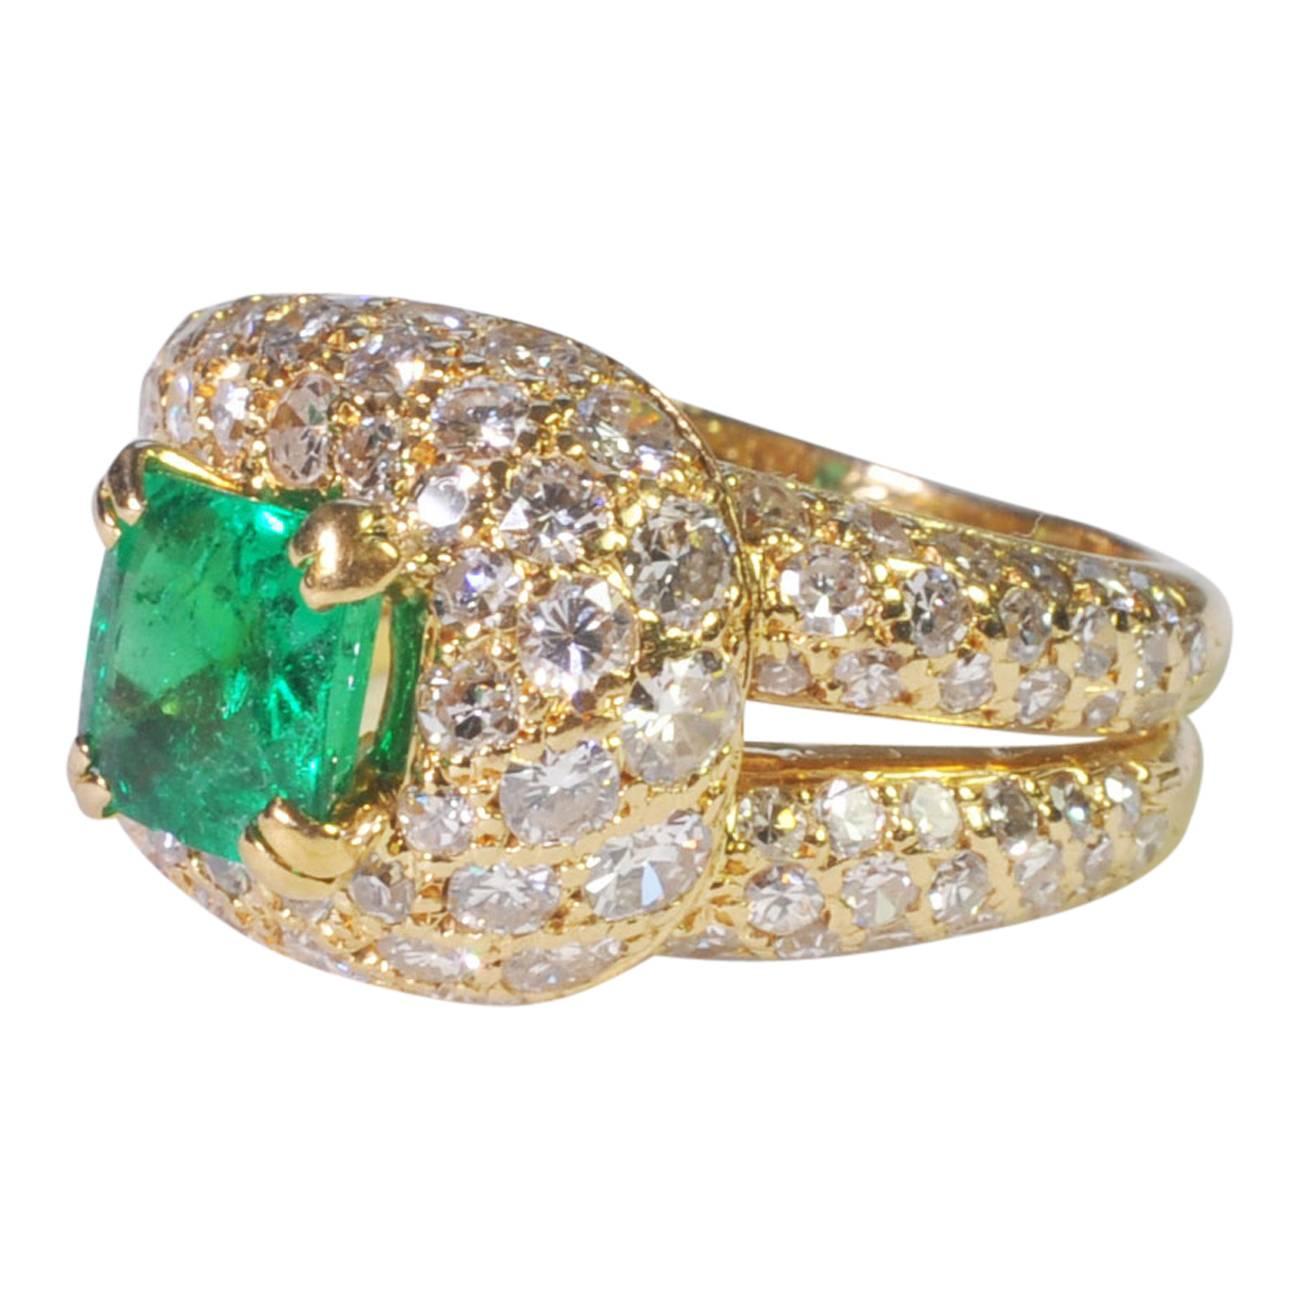 Sparkling emerald and diamond ring by Boucheron; the ring is formed of a double gold band pavé set with 8-cut diamonds which loop round a vibrant green/blue emerald.  The emerald weighs 1.04ct, the brilliant cut diamonds weight 2ct (approx).  Signed